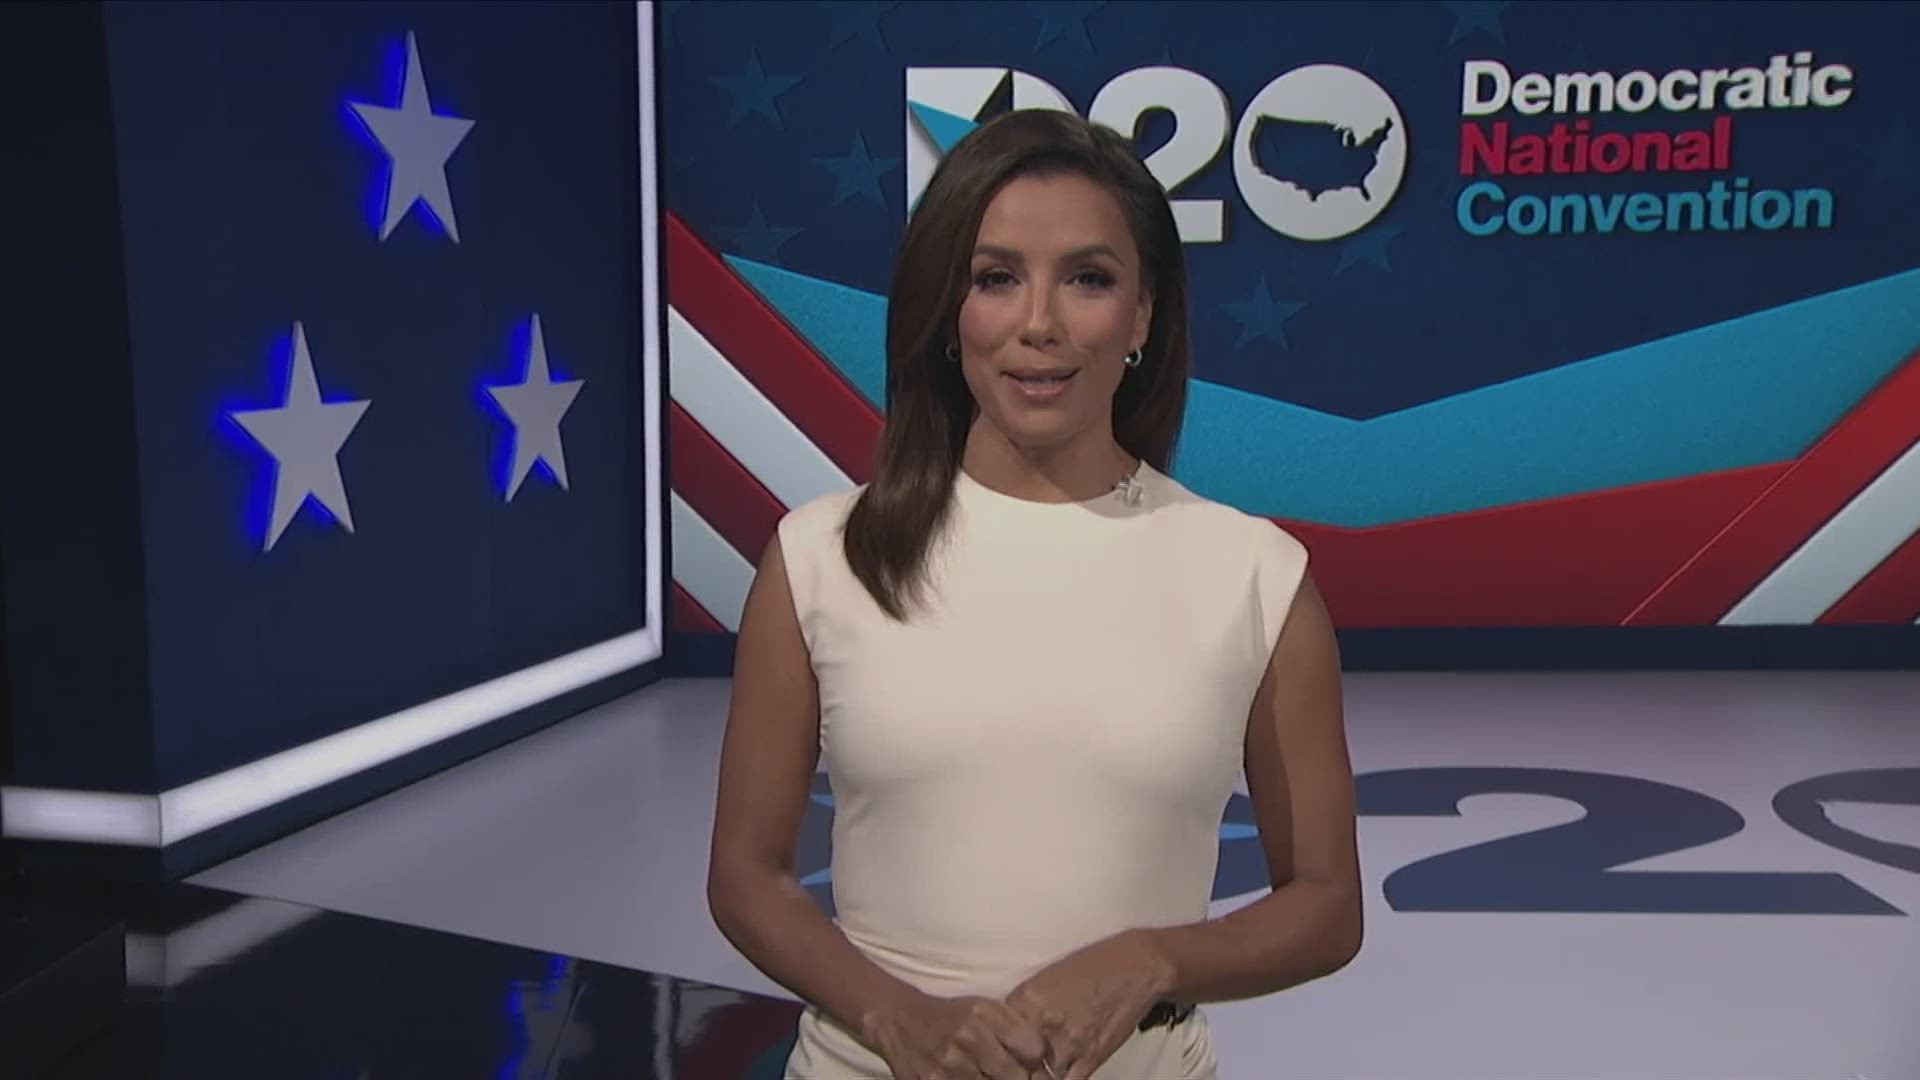 Actress Eva Longoria Baston served as emcee for the opening of the 2020 Democratic National Convention.